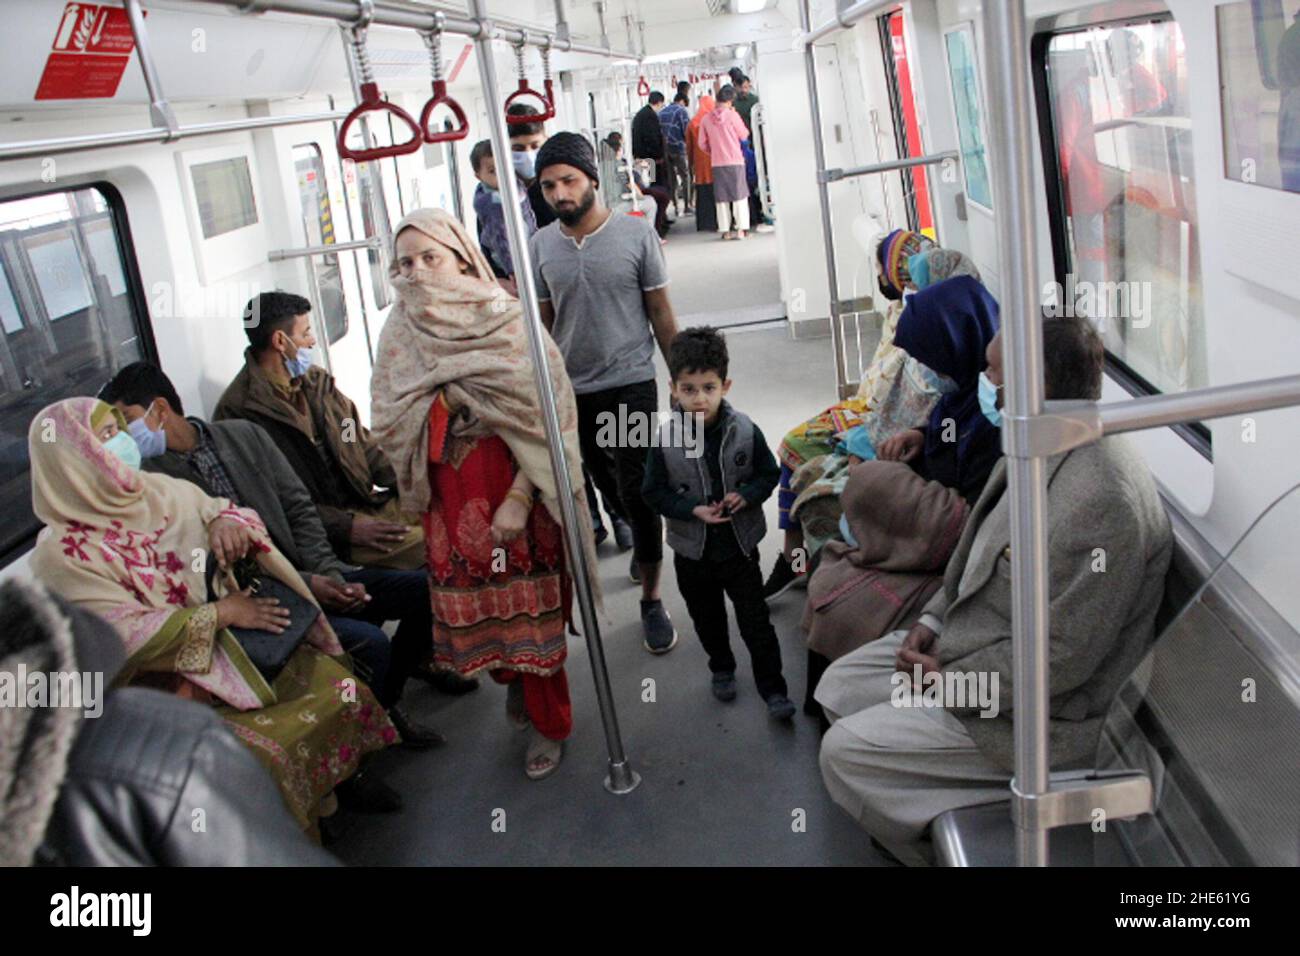 Lahore, Pakistan. 29th Dec, 2021. People take the Orange Line metro train in Lahore, Pakistan, Dec. 29, 2021. Officially open to traffic on Oct. 25, 2020, the eco-friendly Orange Line metro train is an early project under the China-Pakistan Economic Corridor (CPEC), a flagship project of the China-proposed Belt and Road Initiative. TO GO WITH 'Feature: Lahore Orange Line, epitome of China-Pakistan friendship' Credit: Jamil Ahmed/Xinhua/Alamy Live News Stock Photo